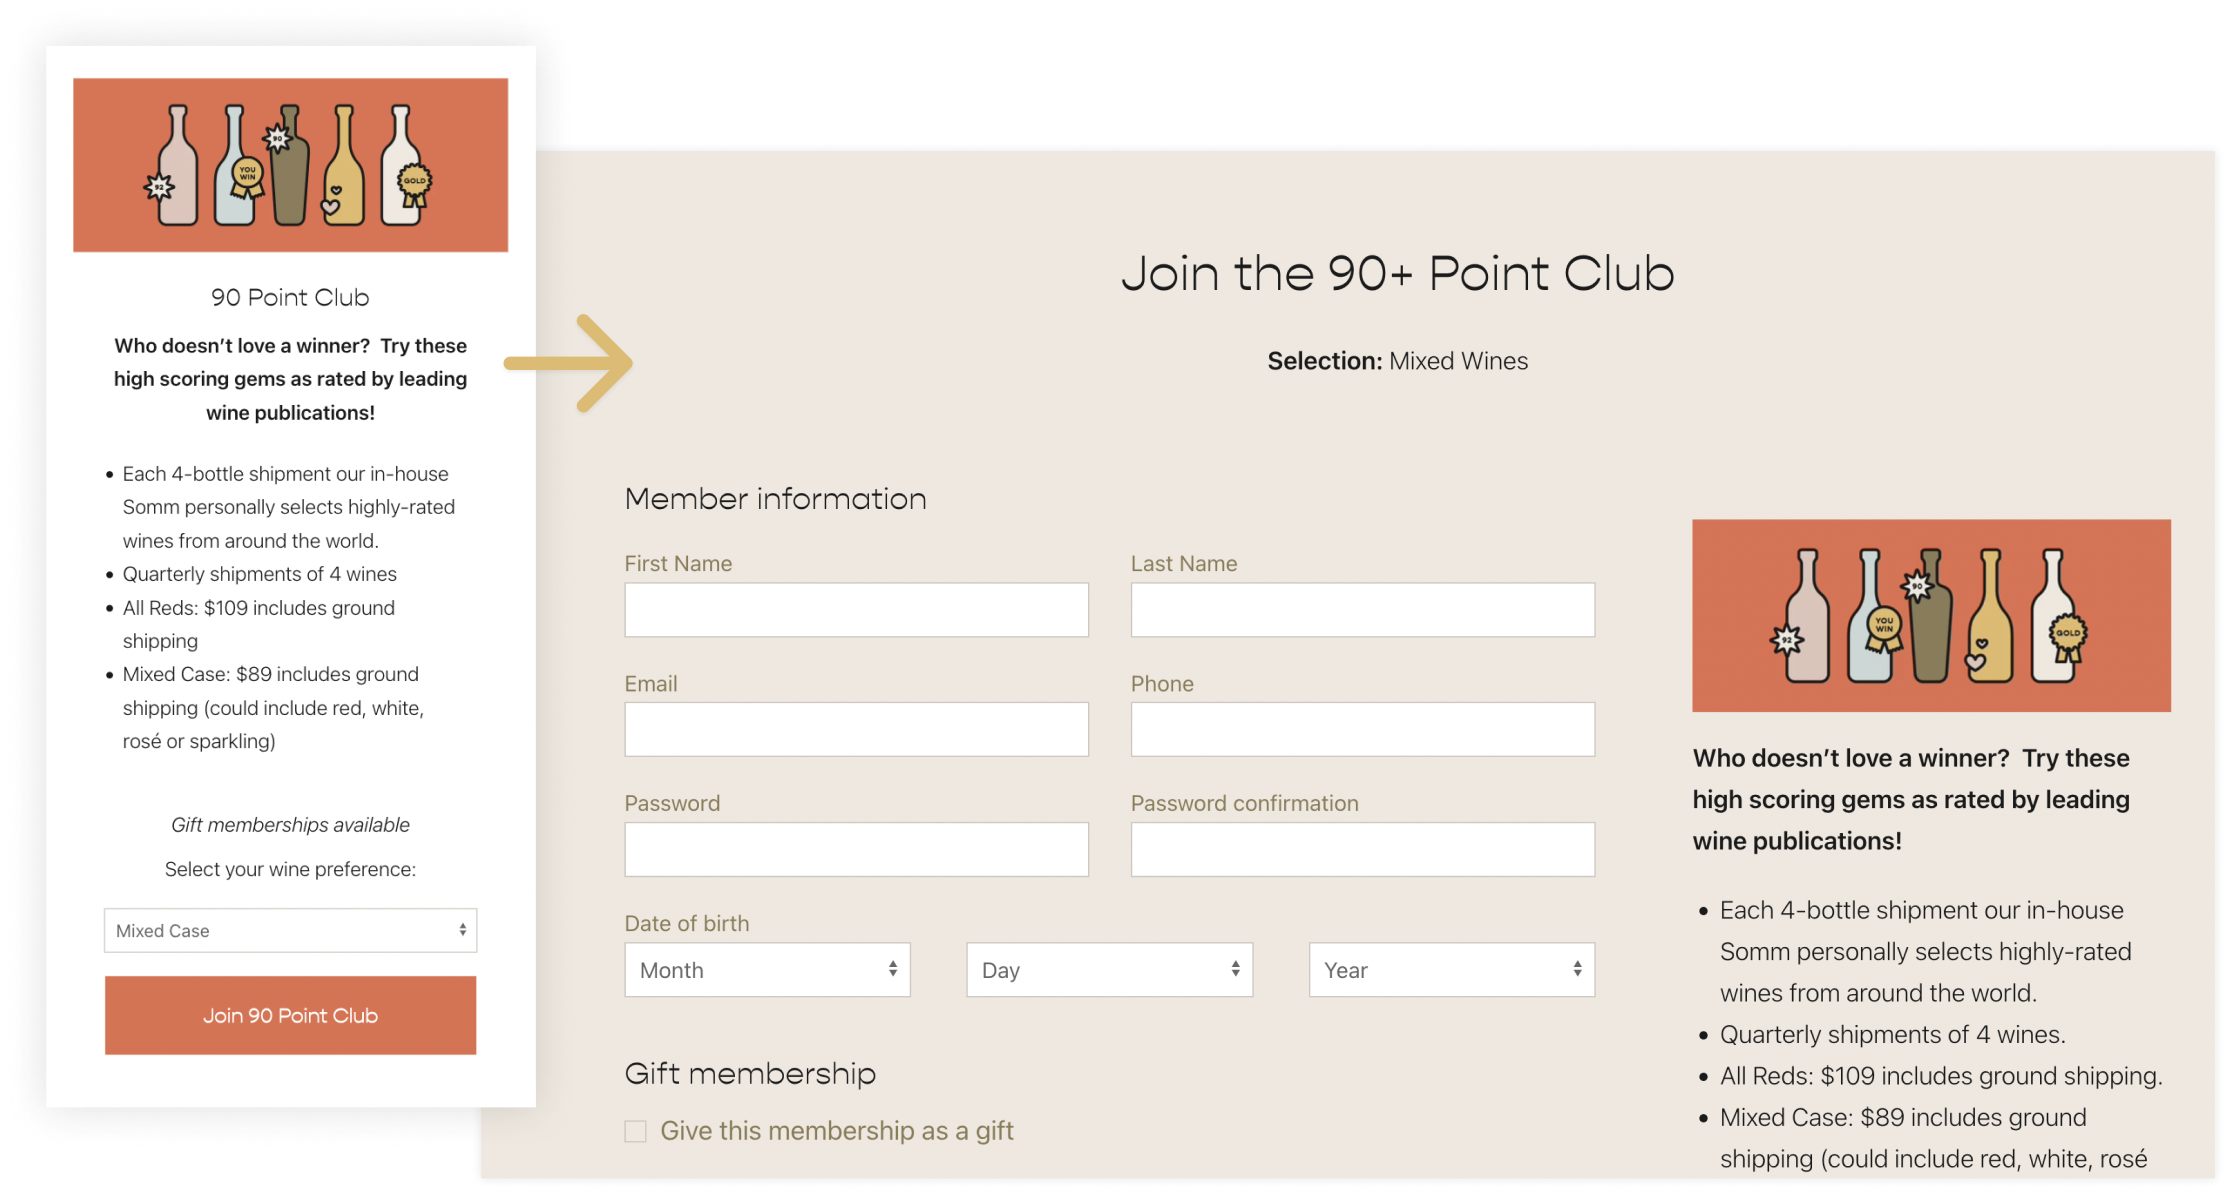 OKSOMM club page and join form being displayed at mobile and desktop screen widths